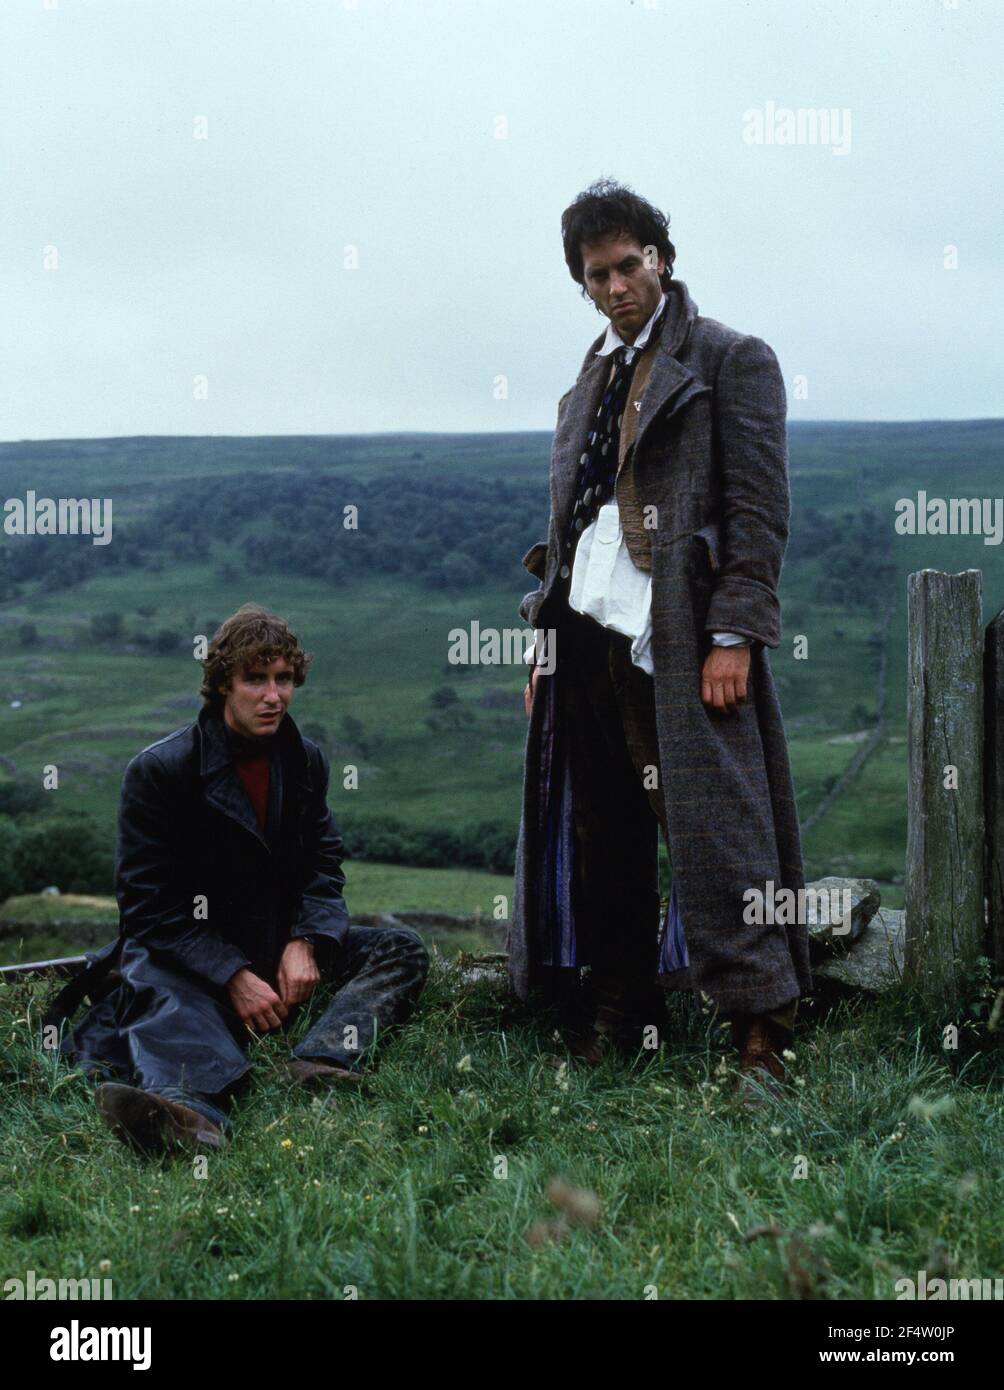 WITHNAIL AND I (1987), directed by BRUCE ROBINSON. Credit: HANDMADE FILMS / Album Stock Photo